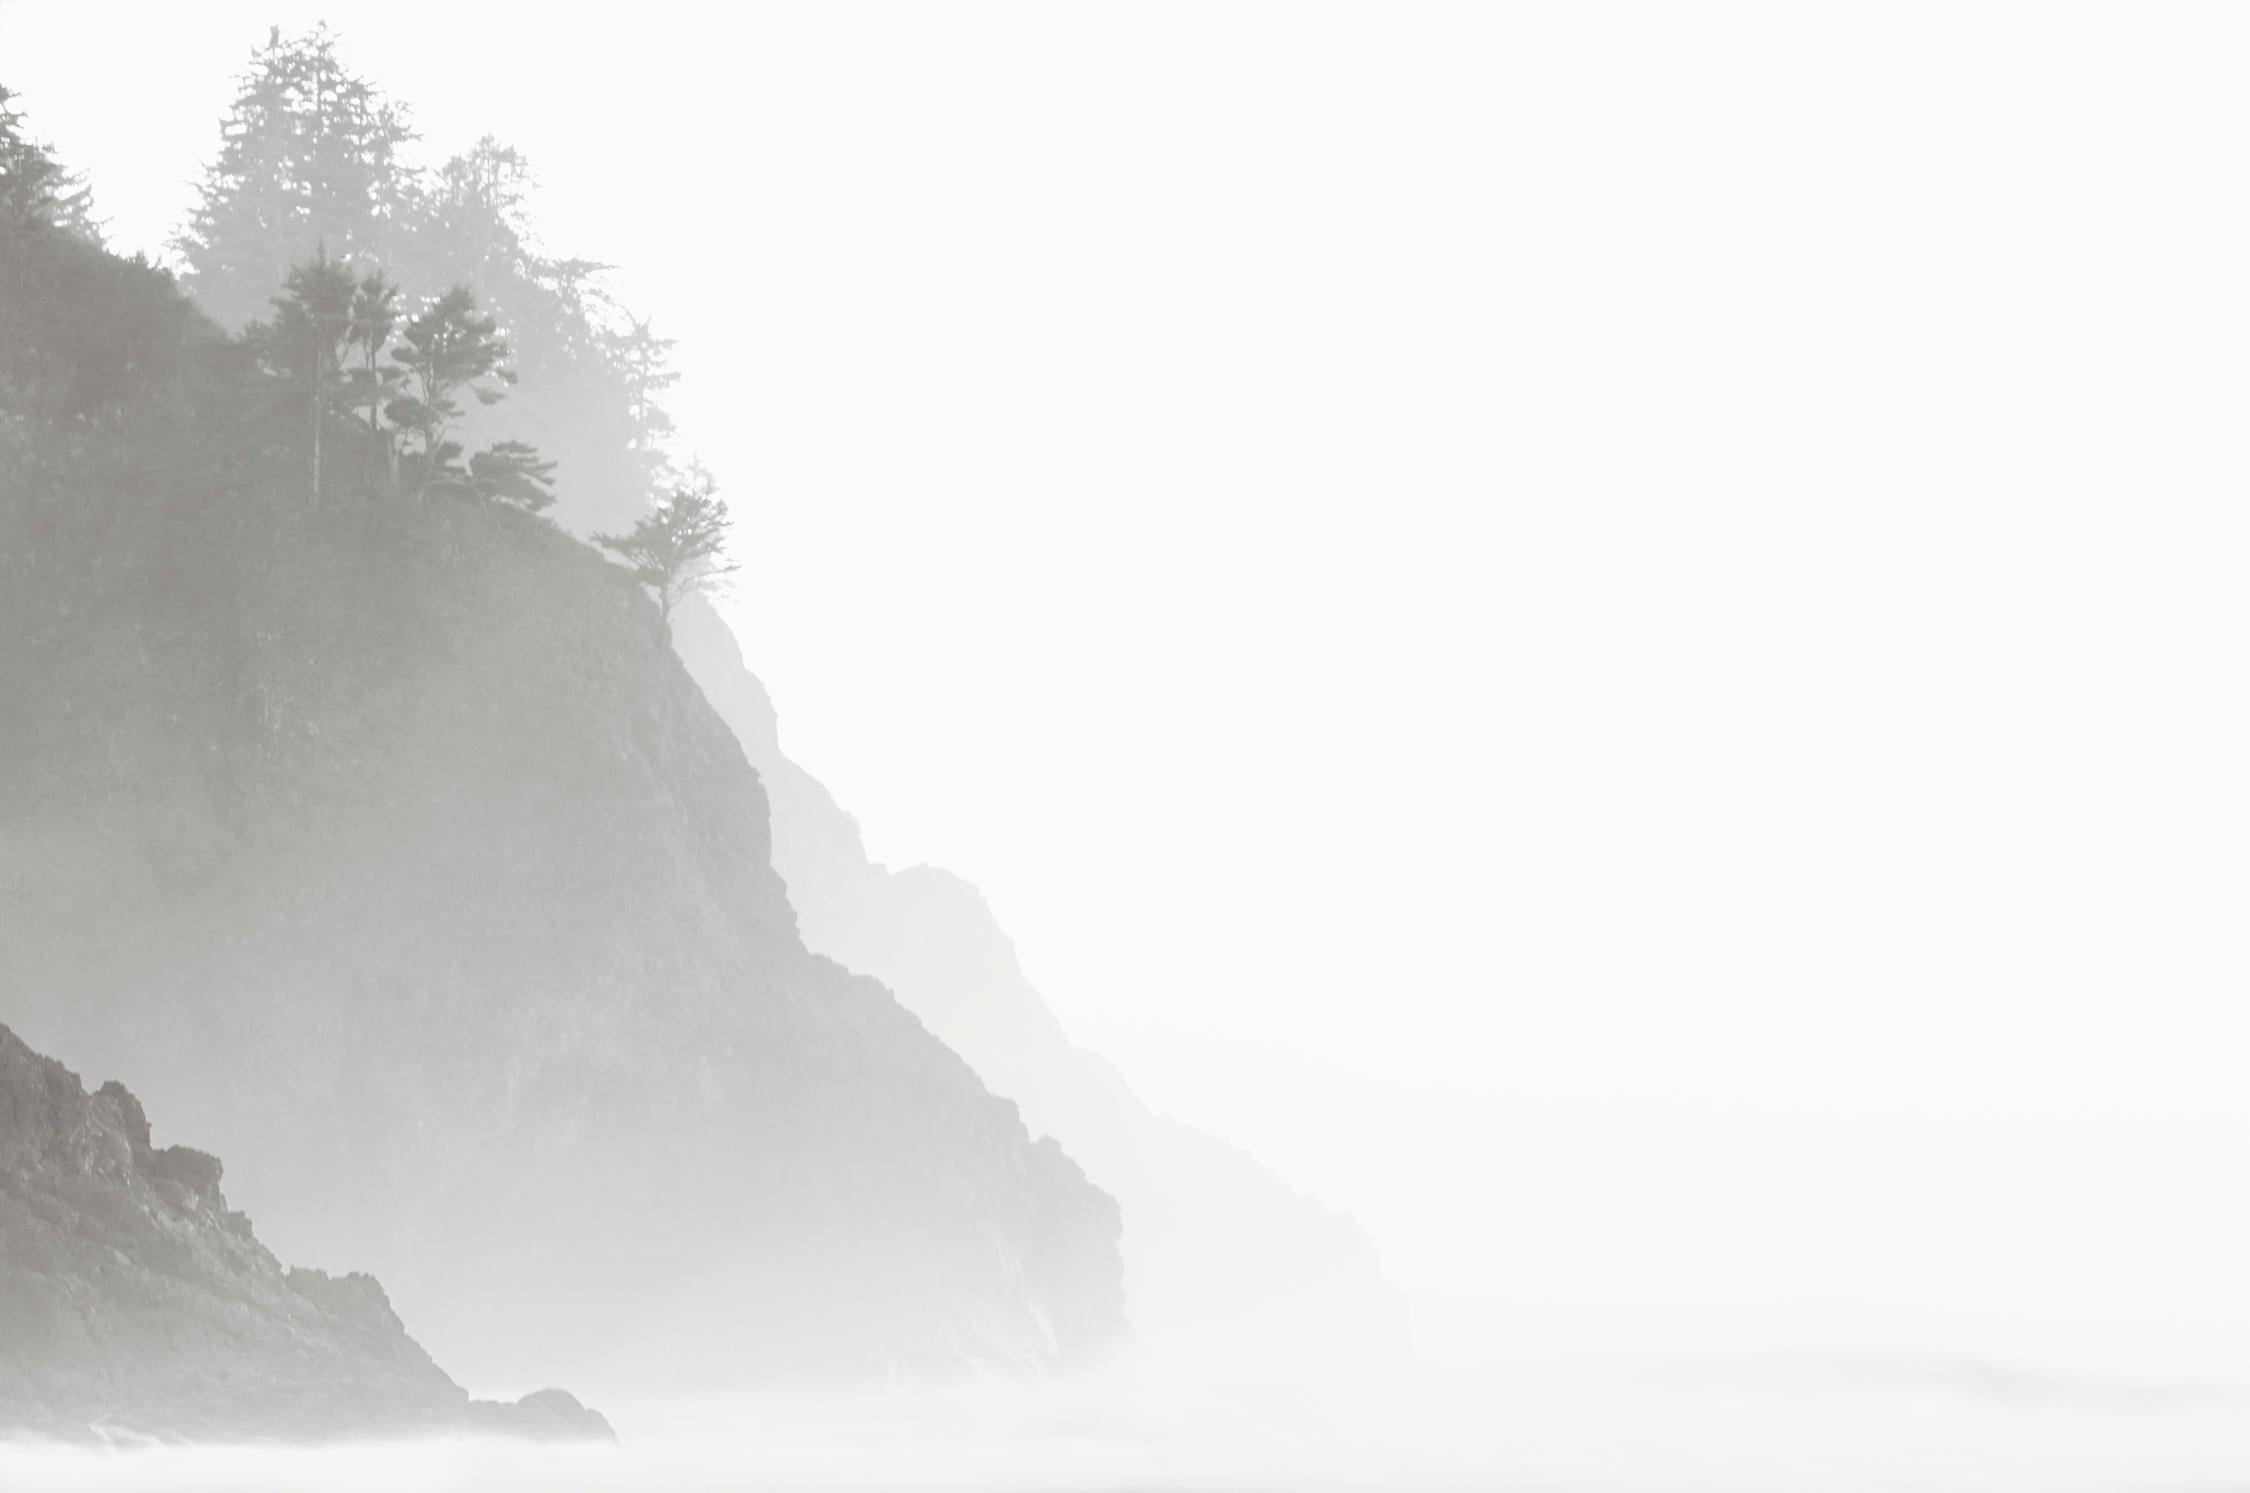 Drew Doggett Landscape Photograph - Ethereal Morning on the Coast of California, Bestseller, Black and White Print